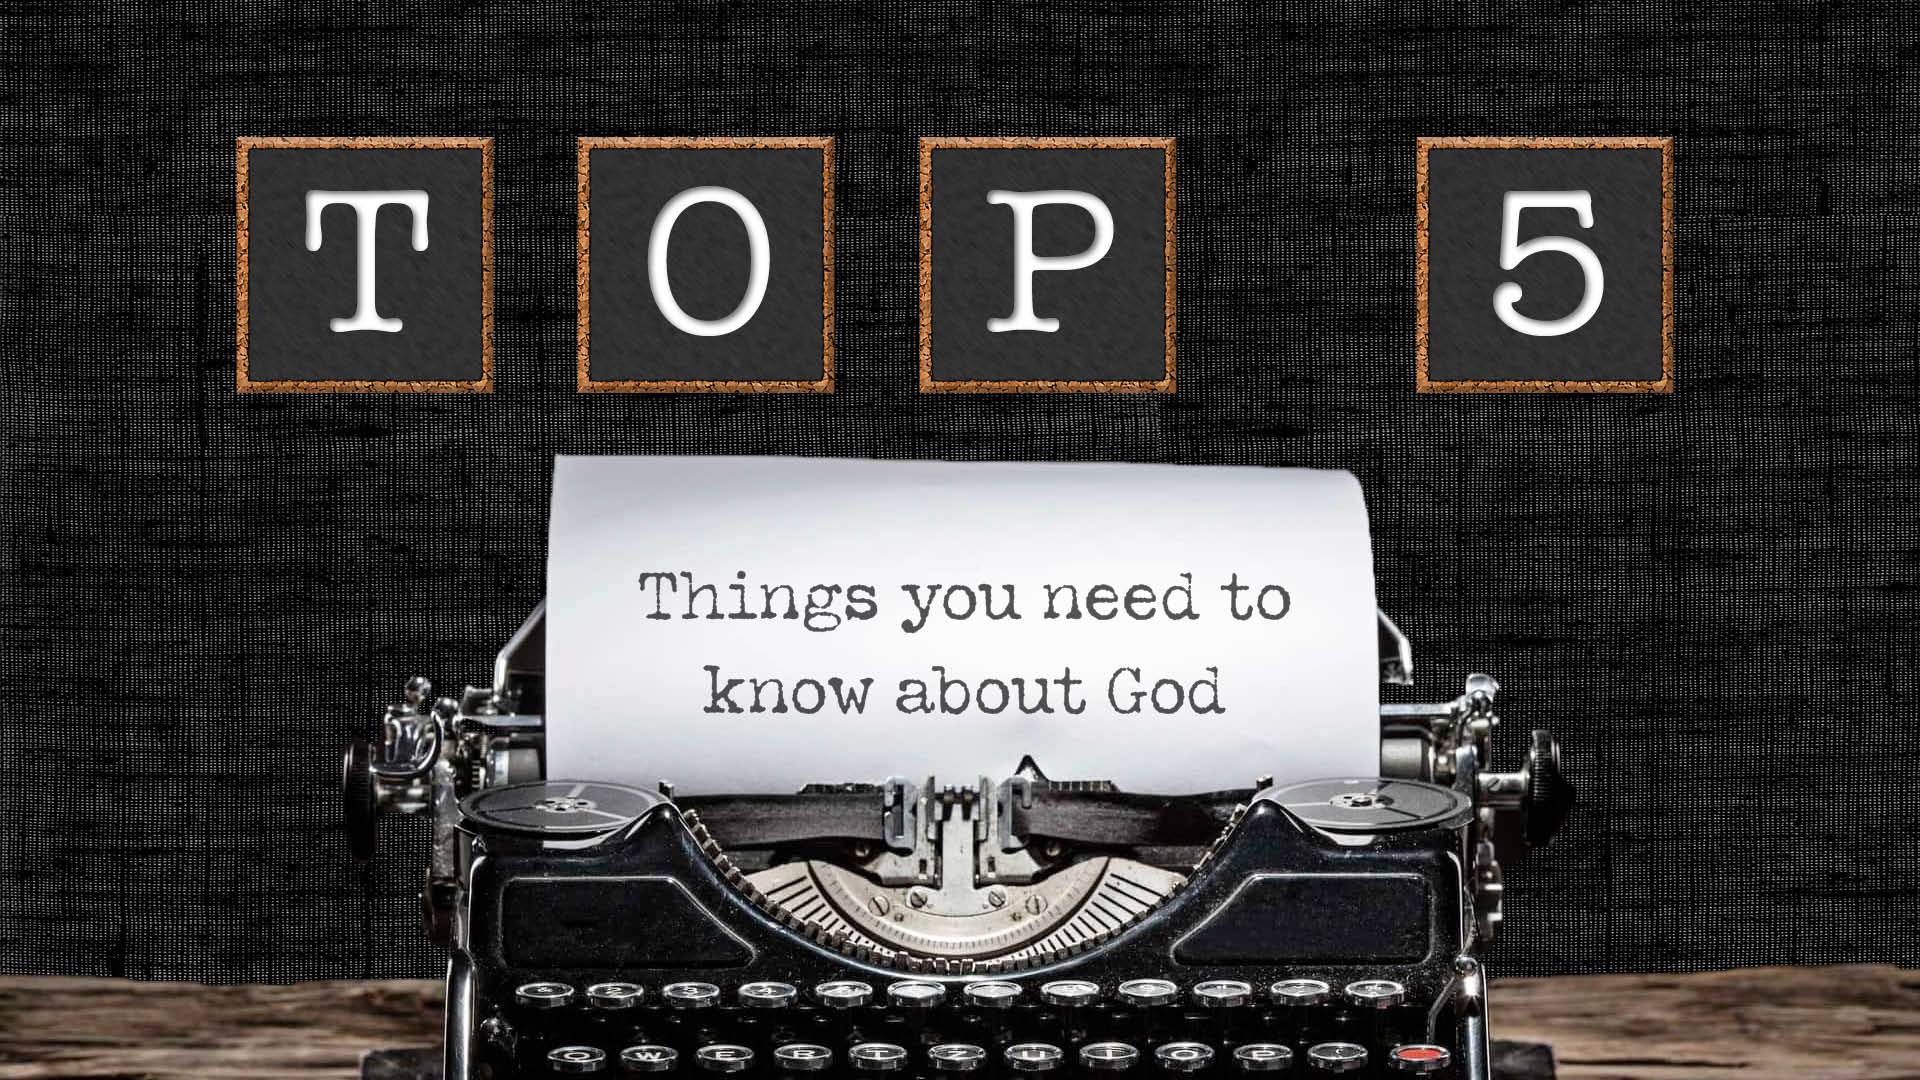 Top 5 Things You Need to Know About God